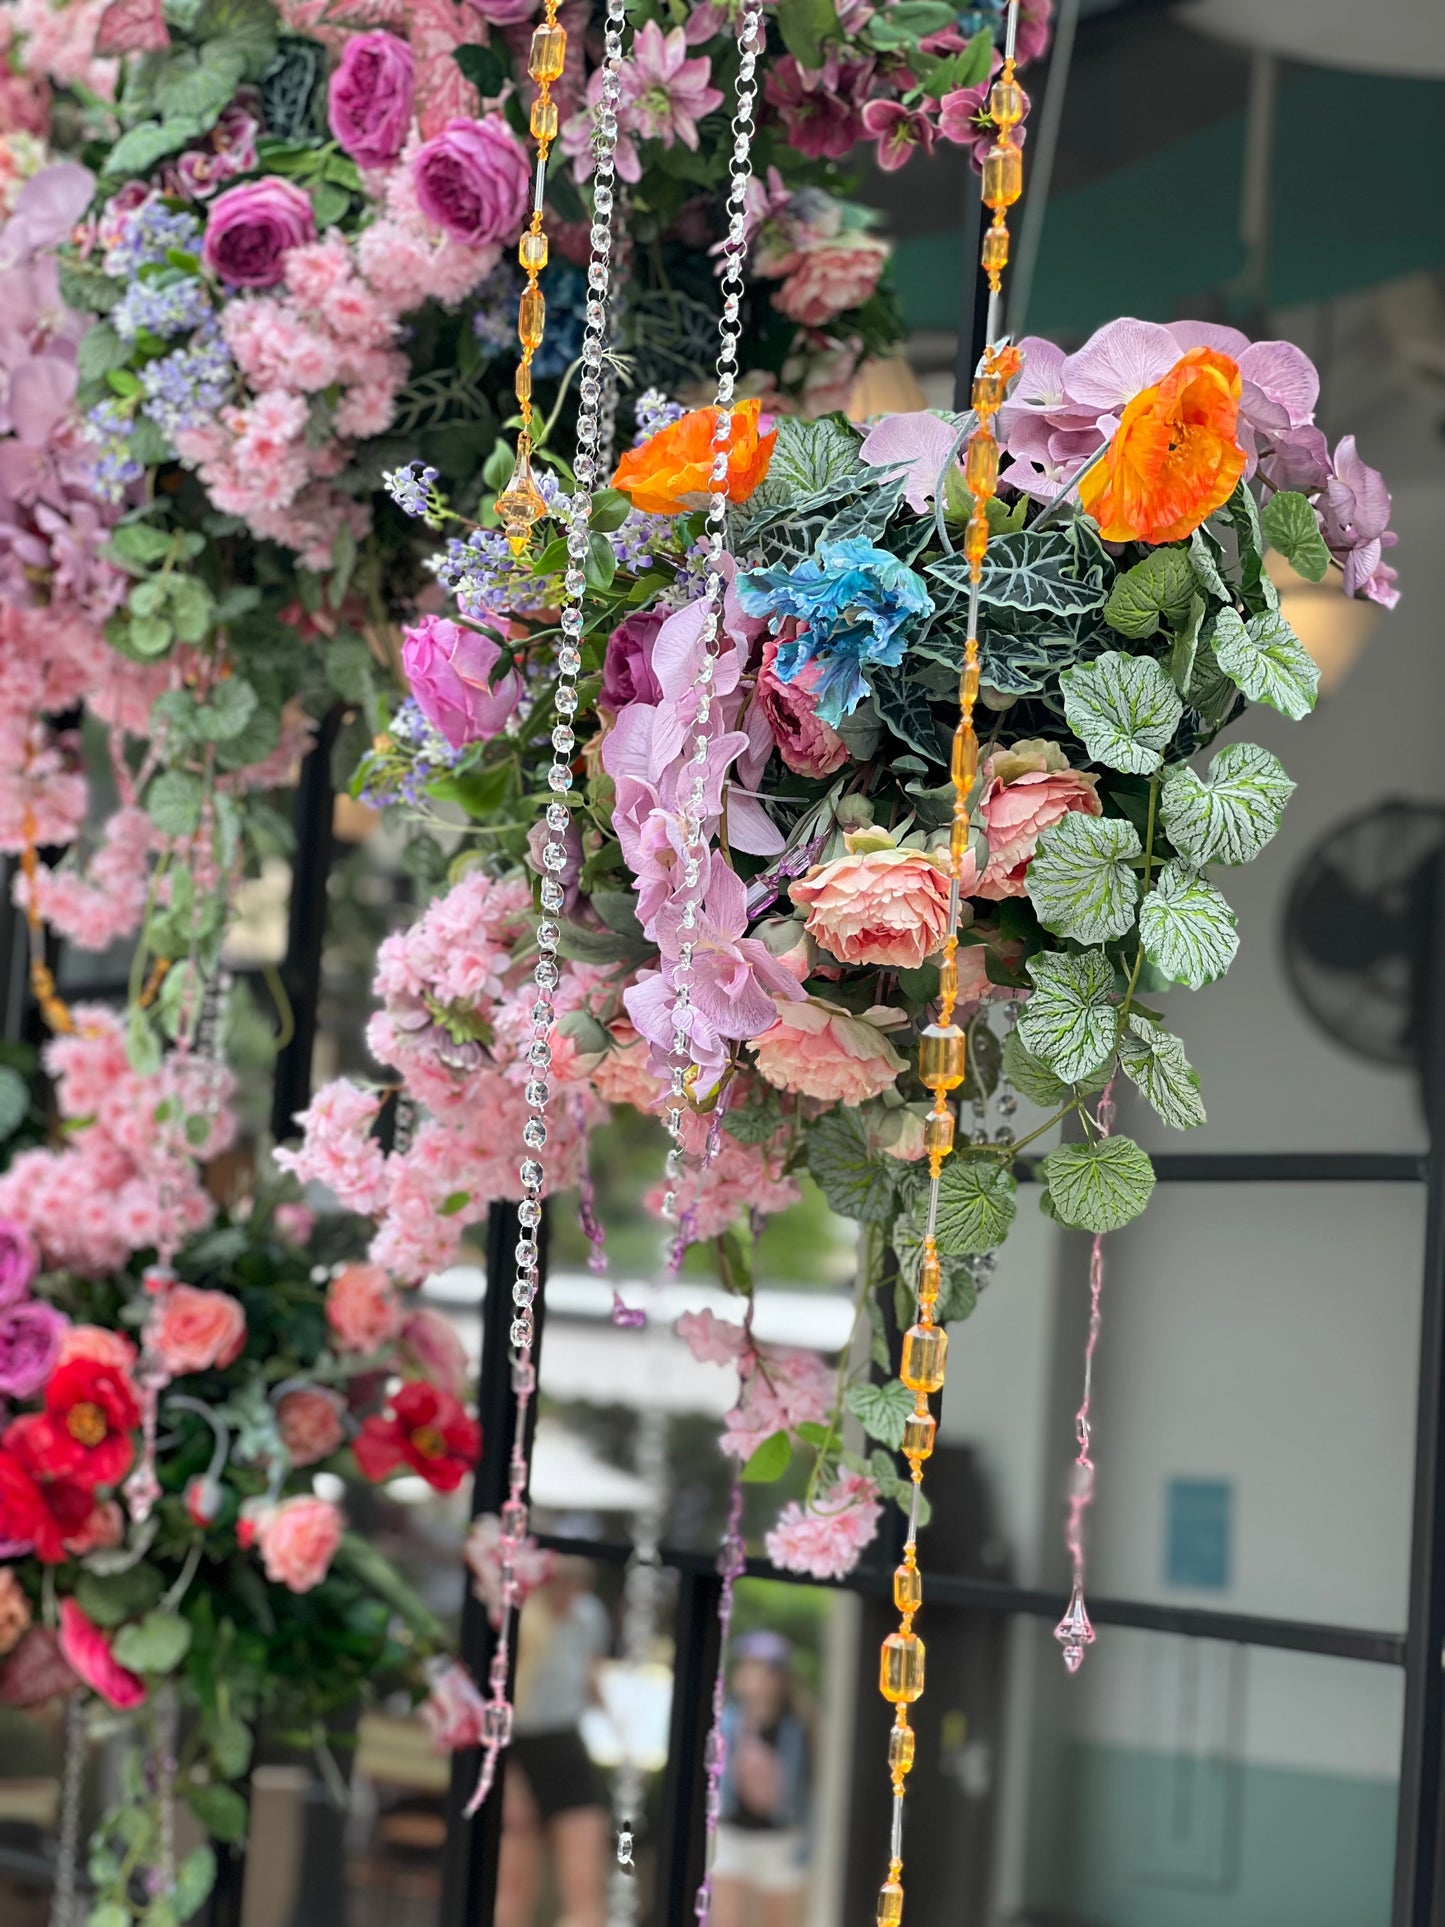 multiple types of flowers of different colors, hanging from above